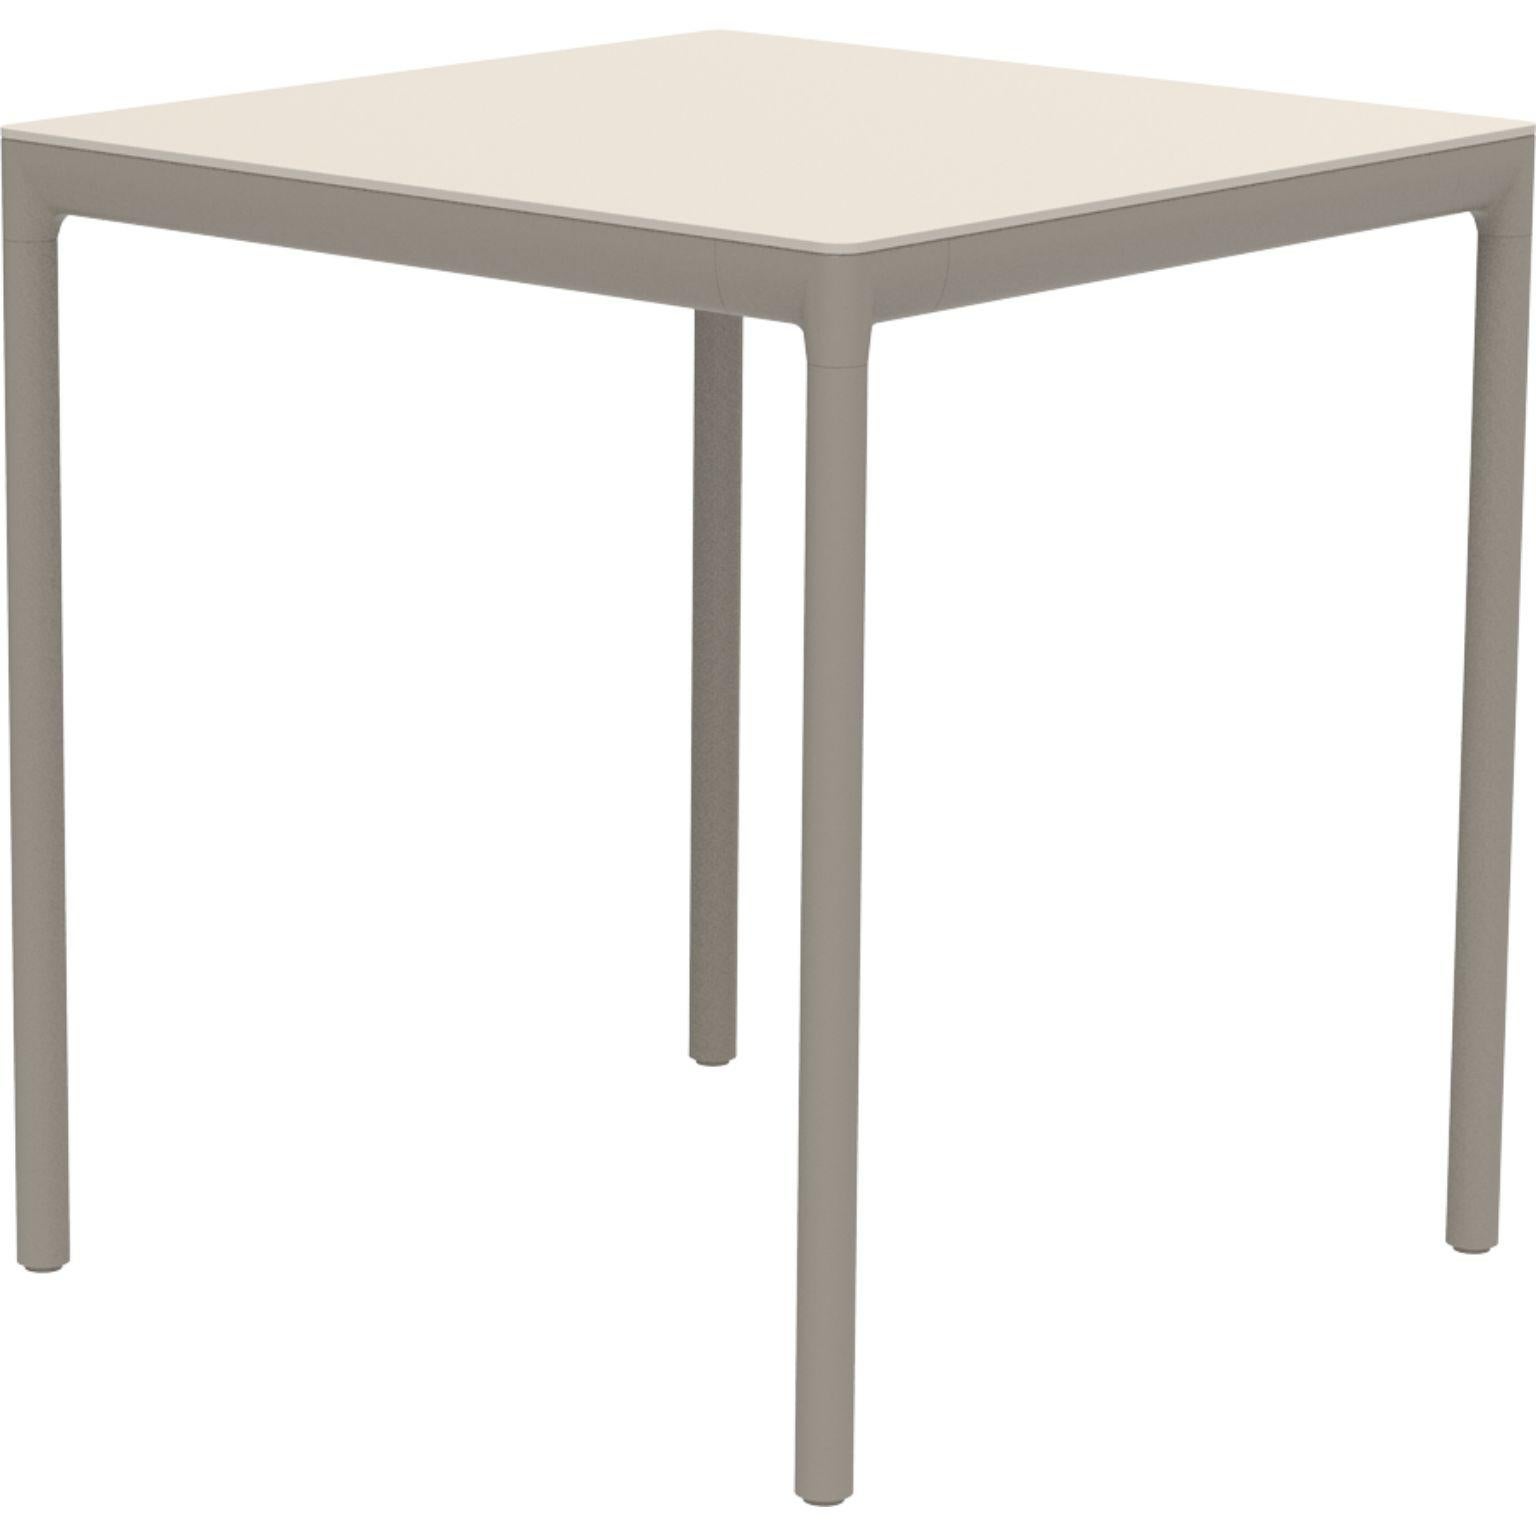 Ribbons cream 70 side table by MOWEE
Dimensions: D70 x W70 x H75 cm.
Material: Aluminum, HPL top.
Weight: 12 kg.
Also available in different colors and finishes. (HPL Black Edge or Neolith top).

An unmistakable collection for its beauty and